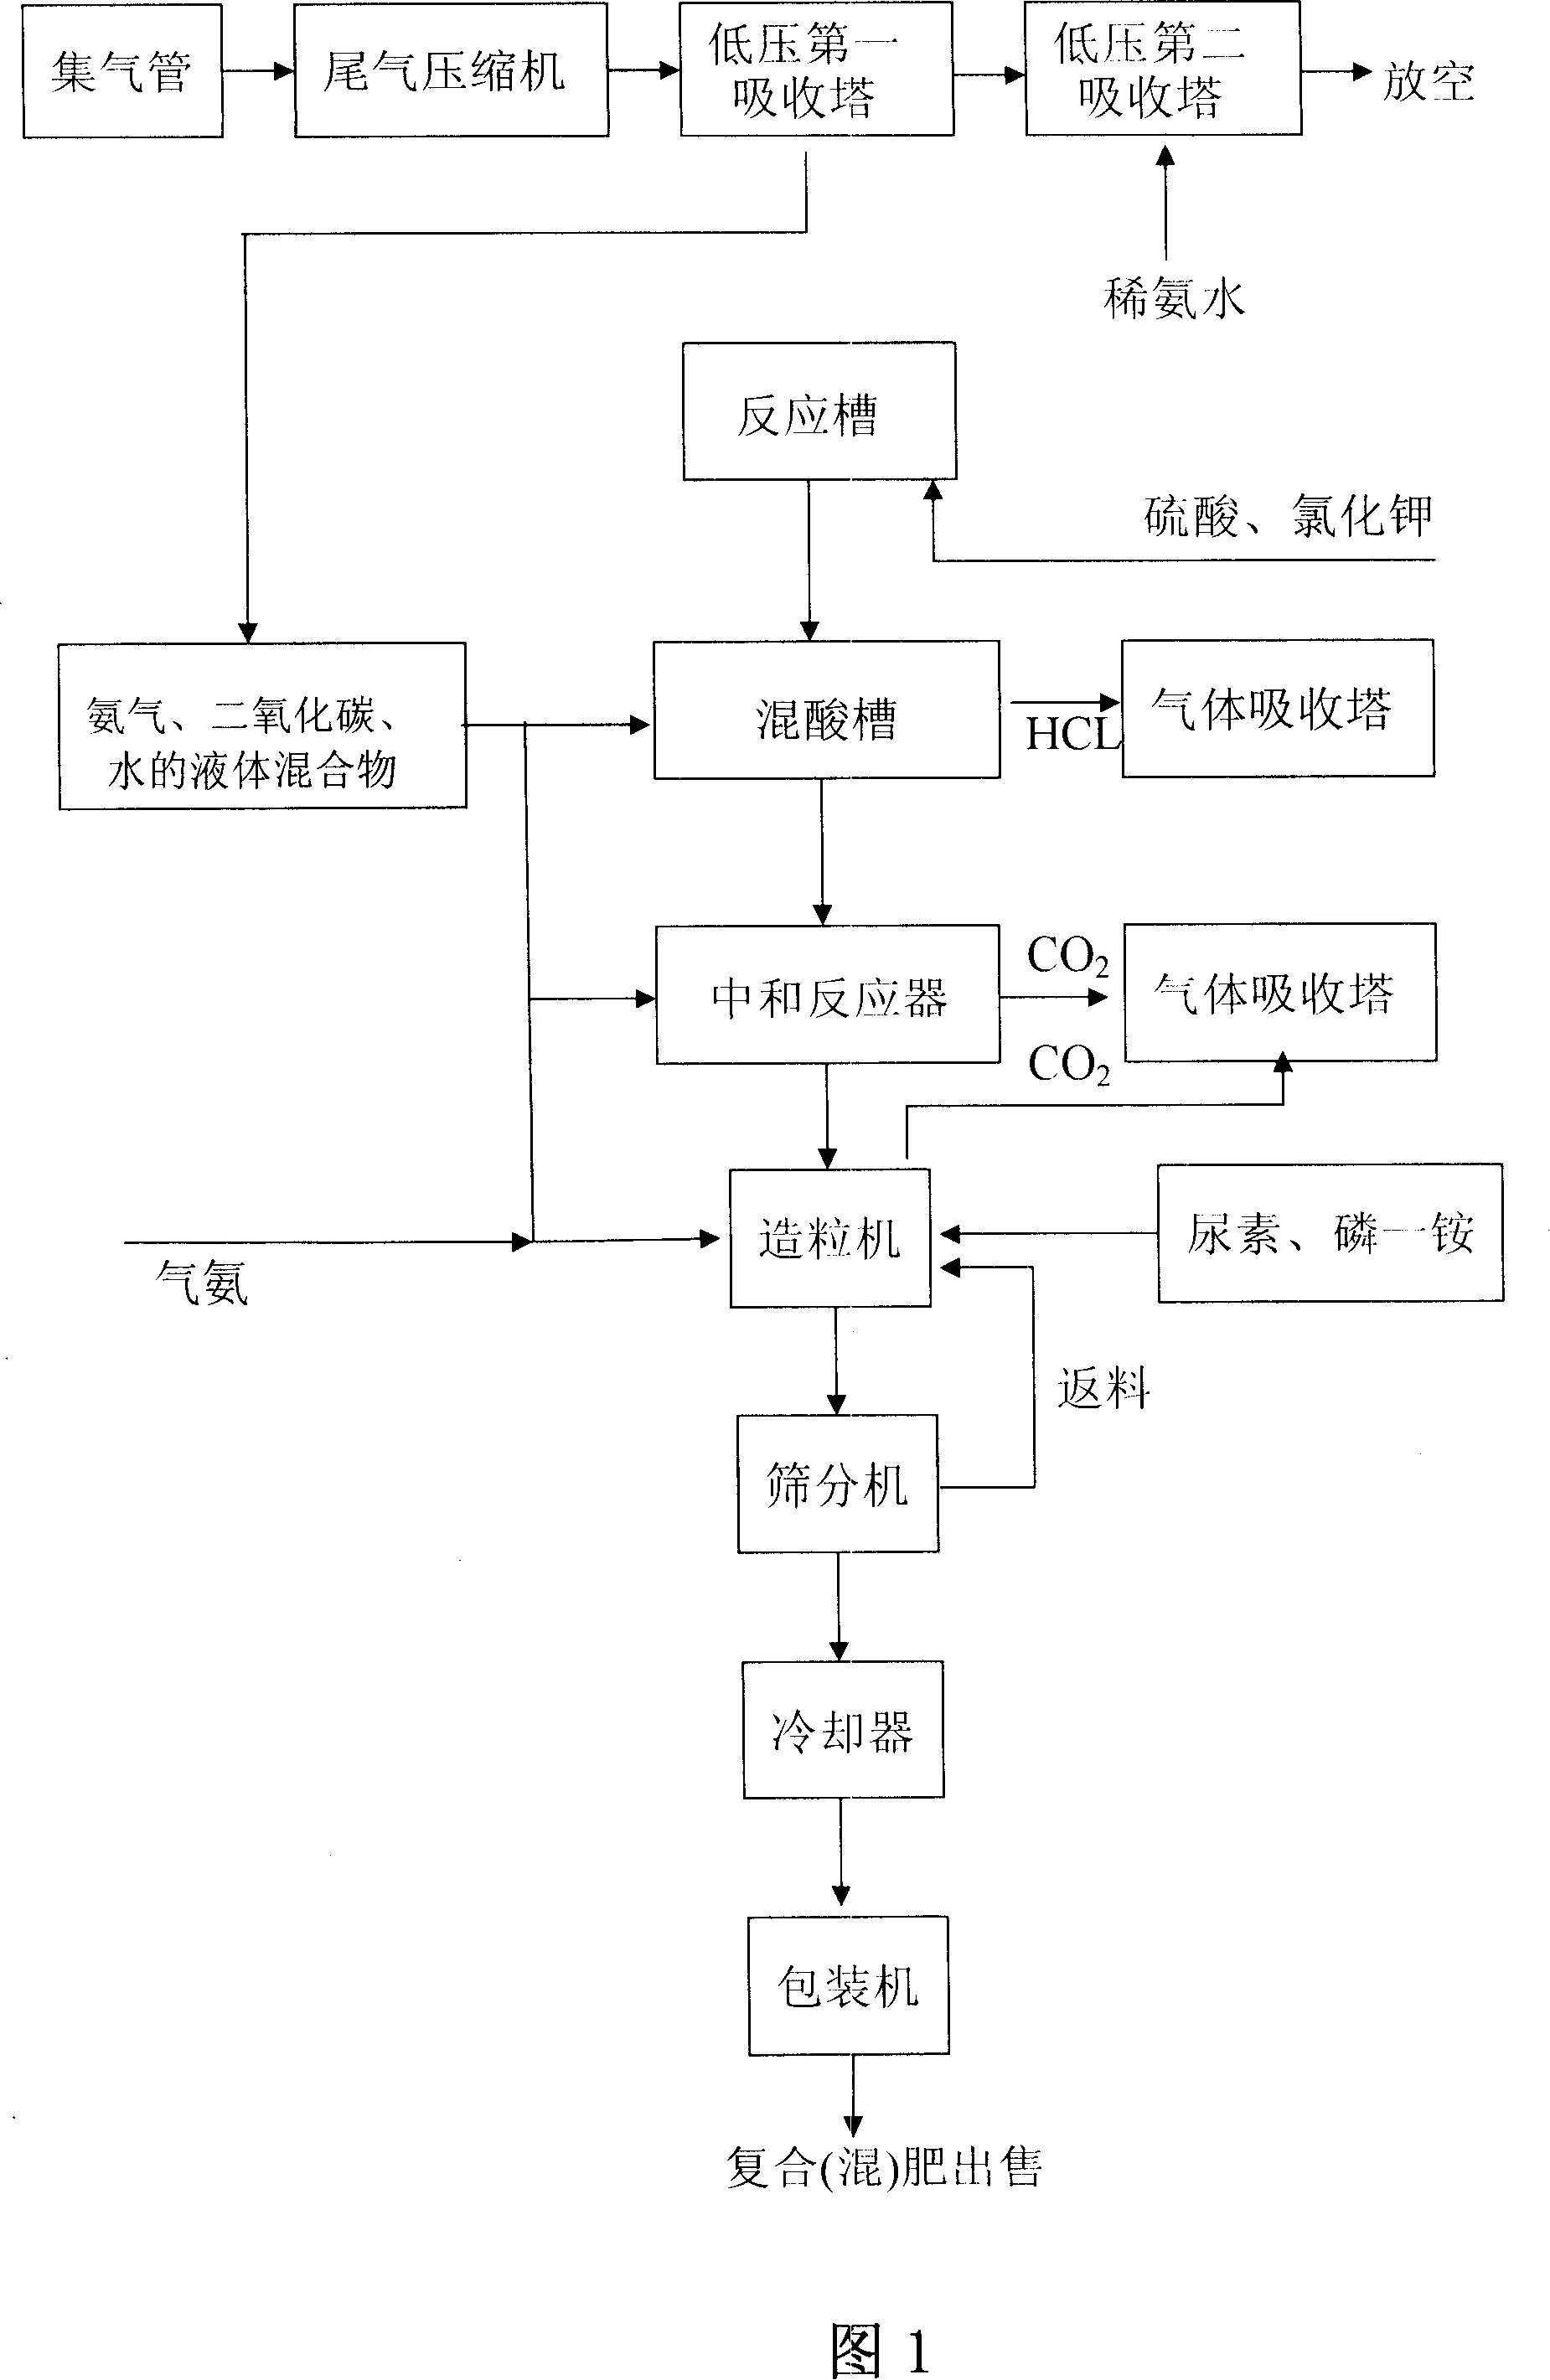 Technique for producing composite (compound) fertilizer by using liquid mixture of ammonia gas, carbon dioxide and water